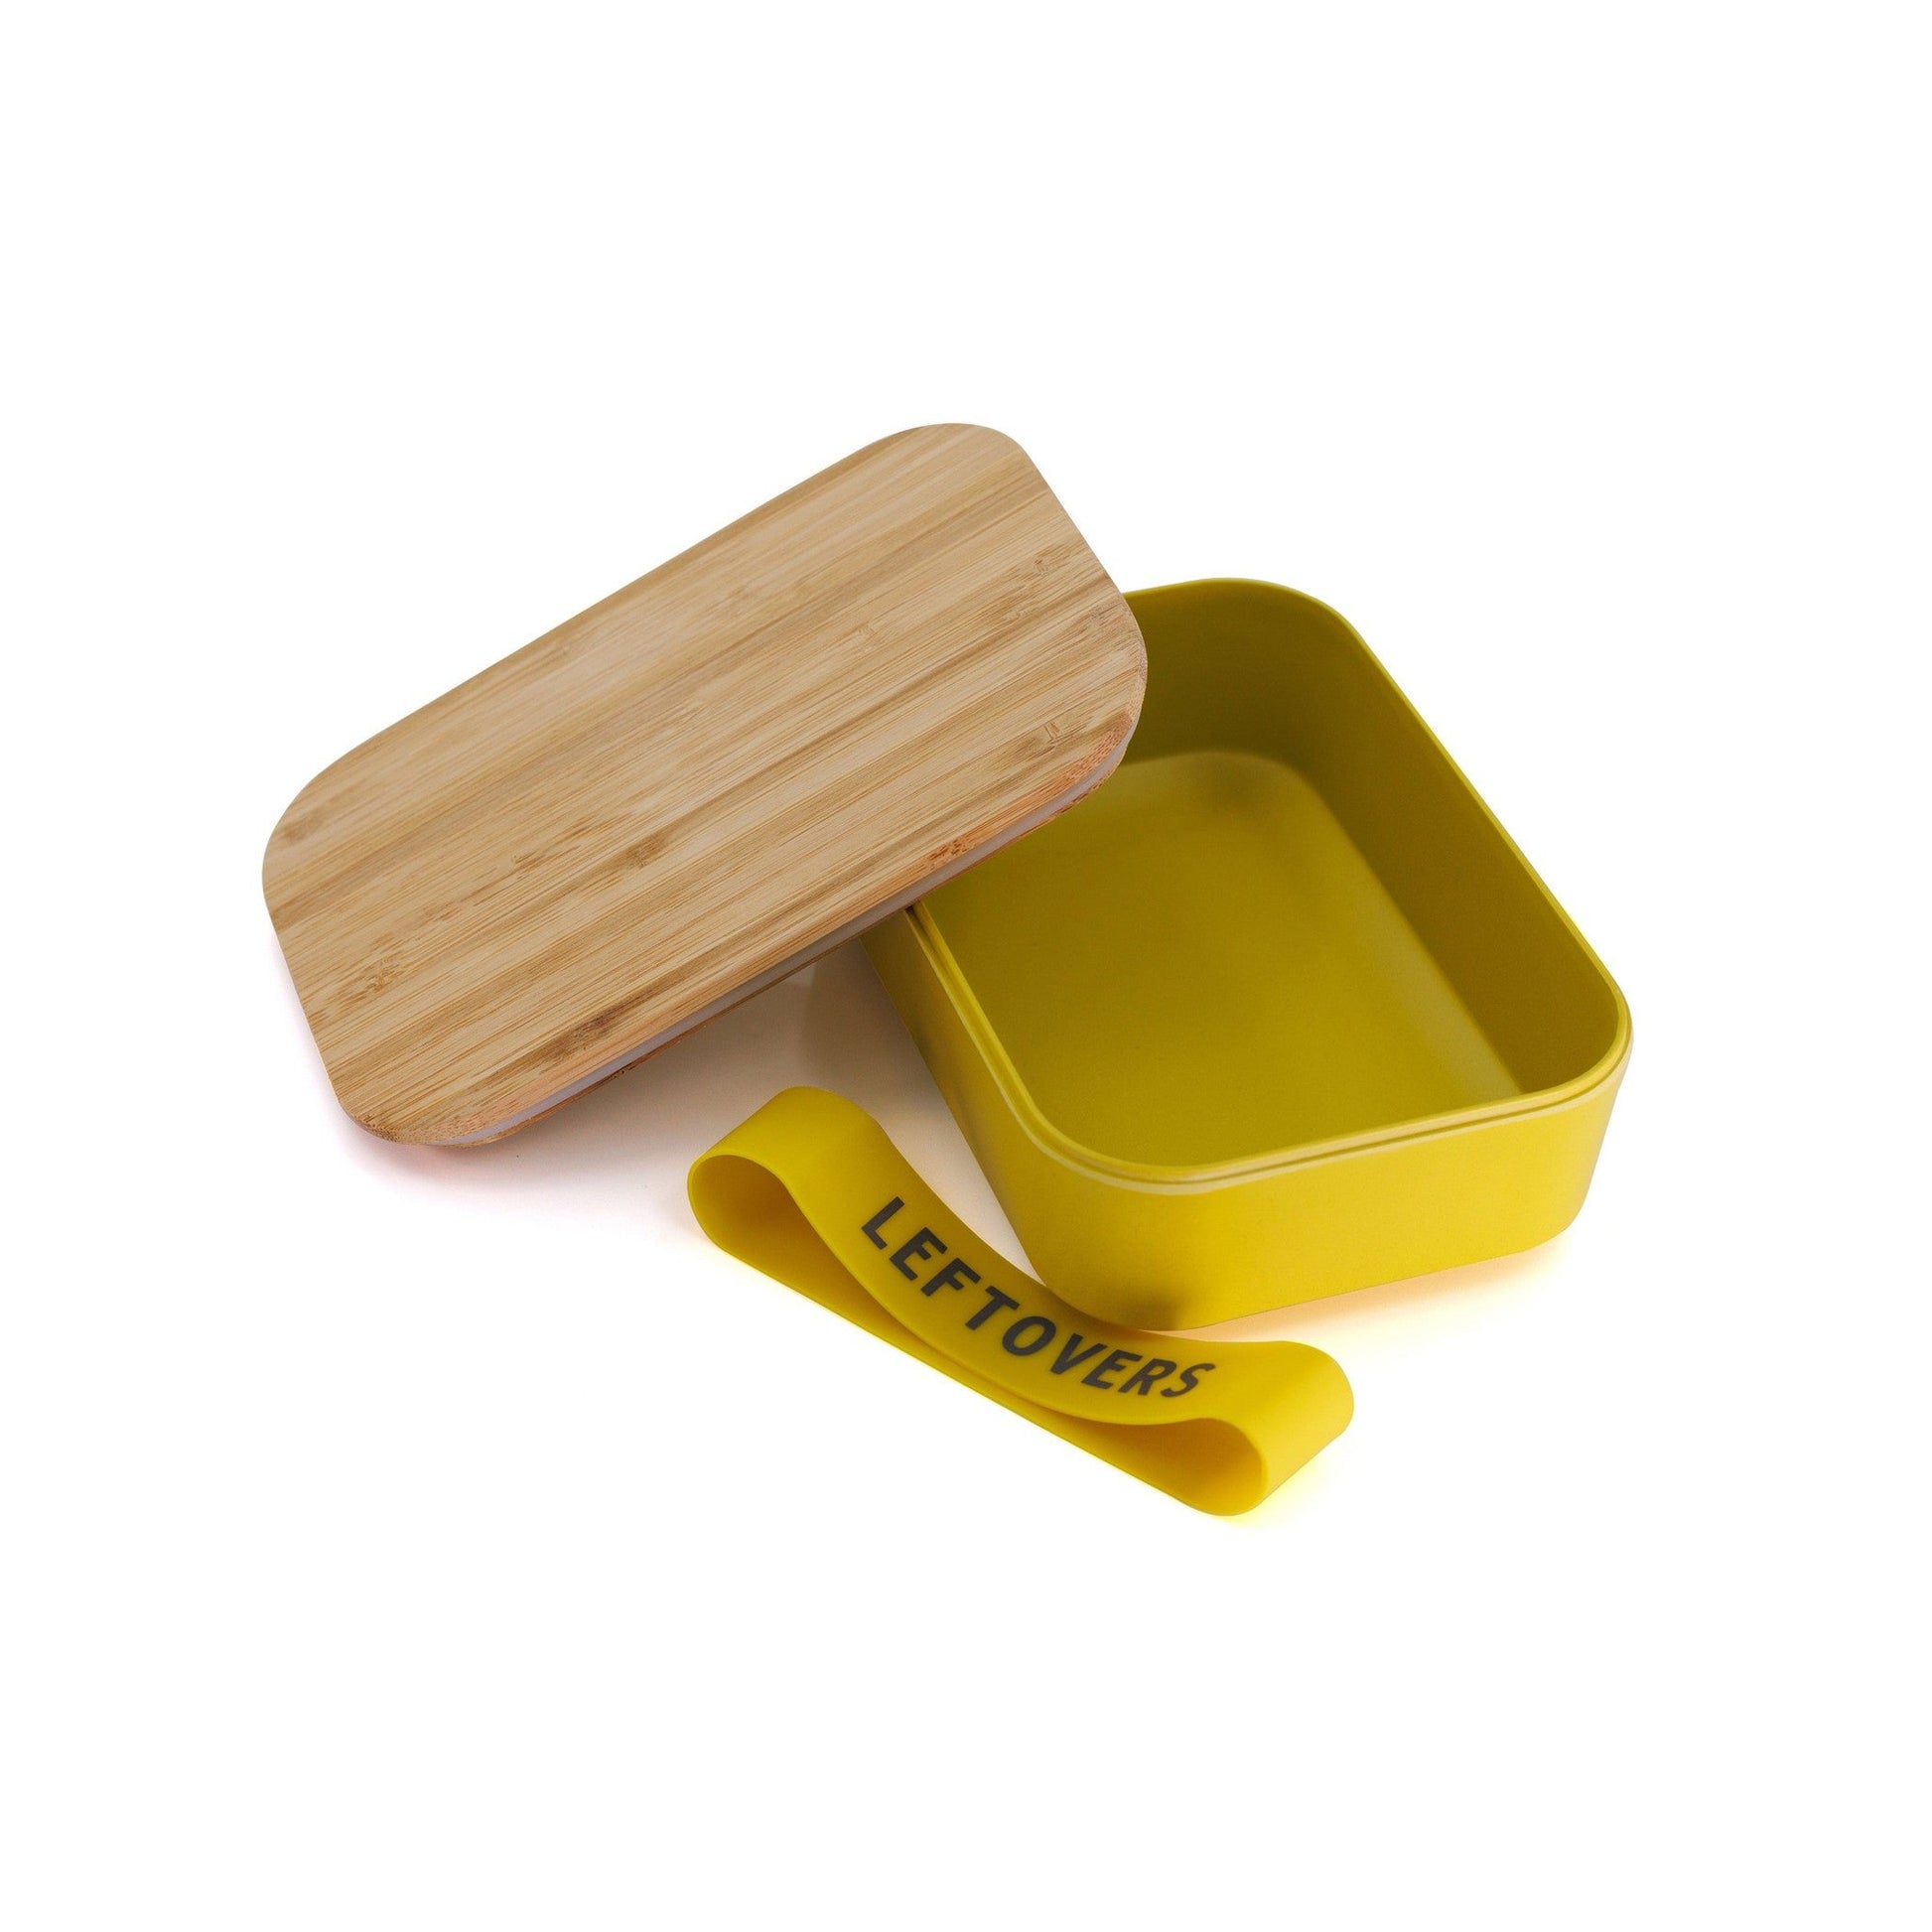 https://shop.getbullish.com/cdn/shop/files/Pack-of-3-Leftovers-Bamboo-Lunch-Box-in-Vivid-Yellow-Eco-Friendly-and-Sustainable-7_5-x-5-x-2-5_87f668fc-cea5-4416-85de-0517e4f52cfa.jpg?v=1685745022&width=1946